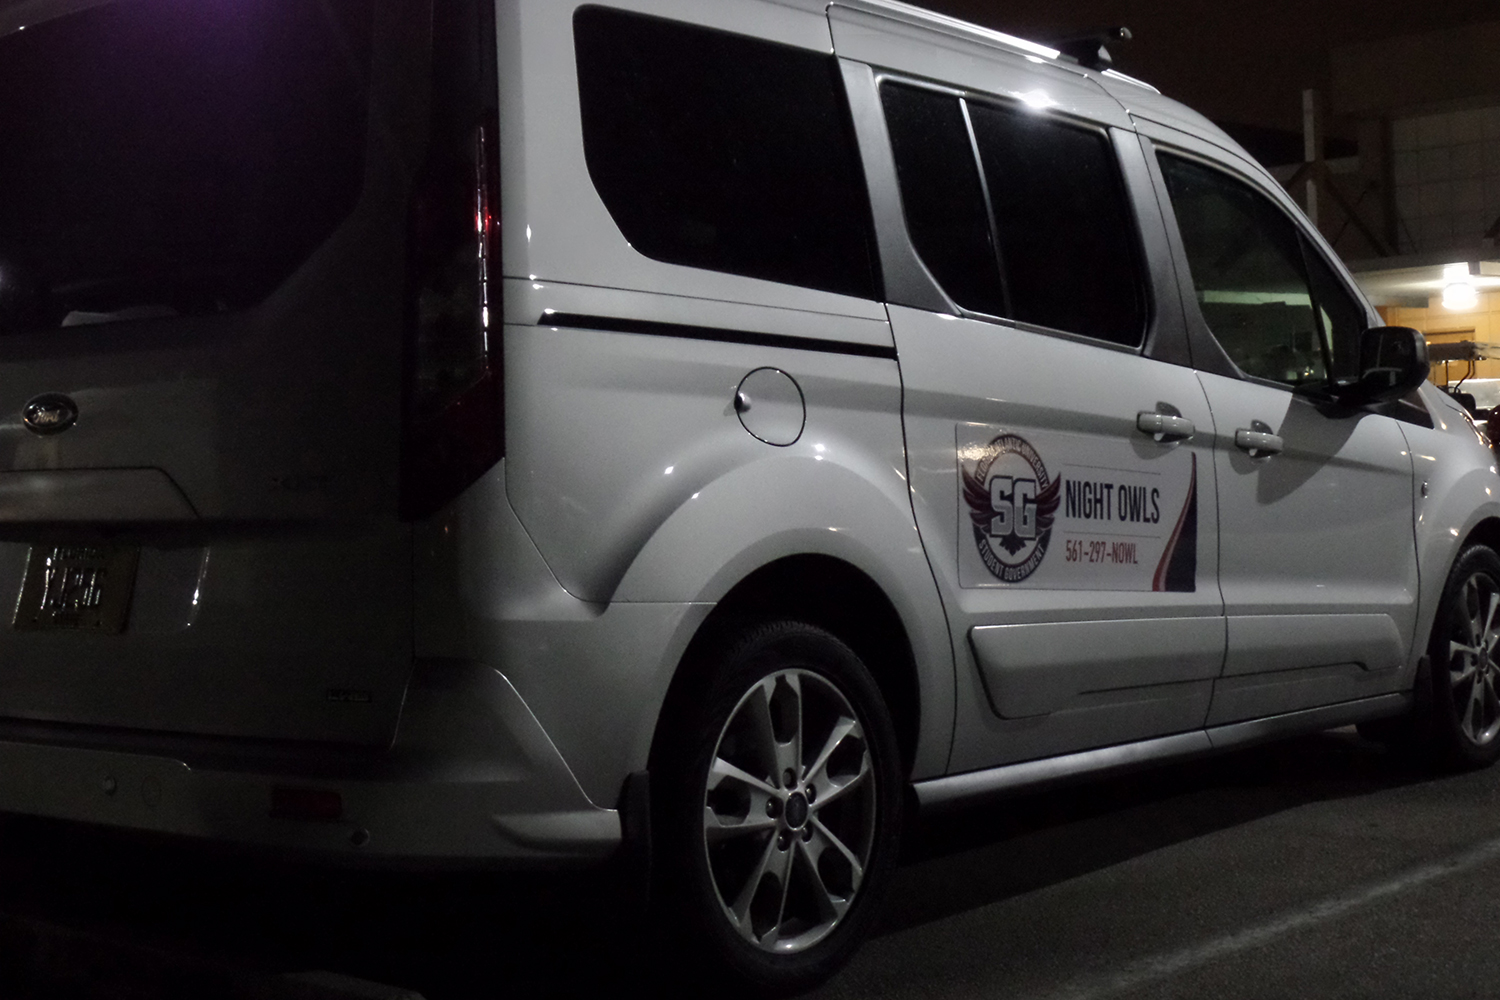 The new 2016 Ford Transit van in operation by Night Owls. J. Chris Hall | Contributing Writer